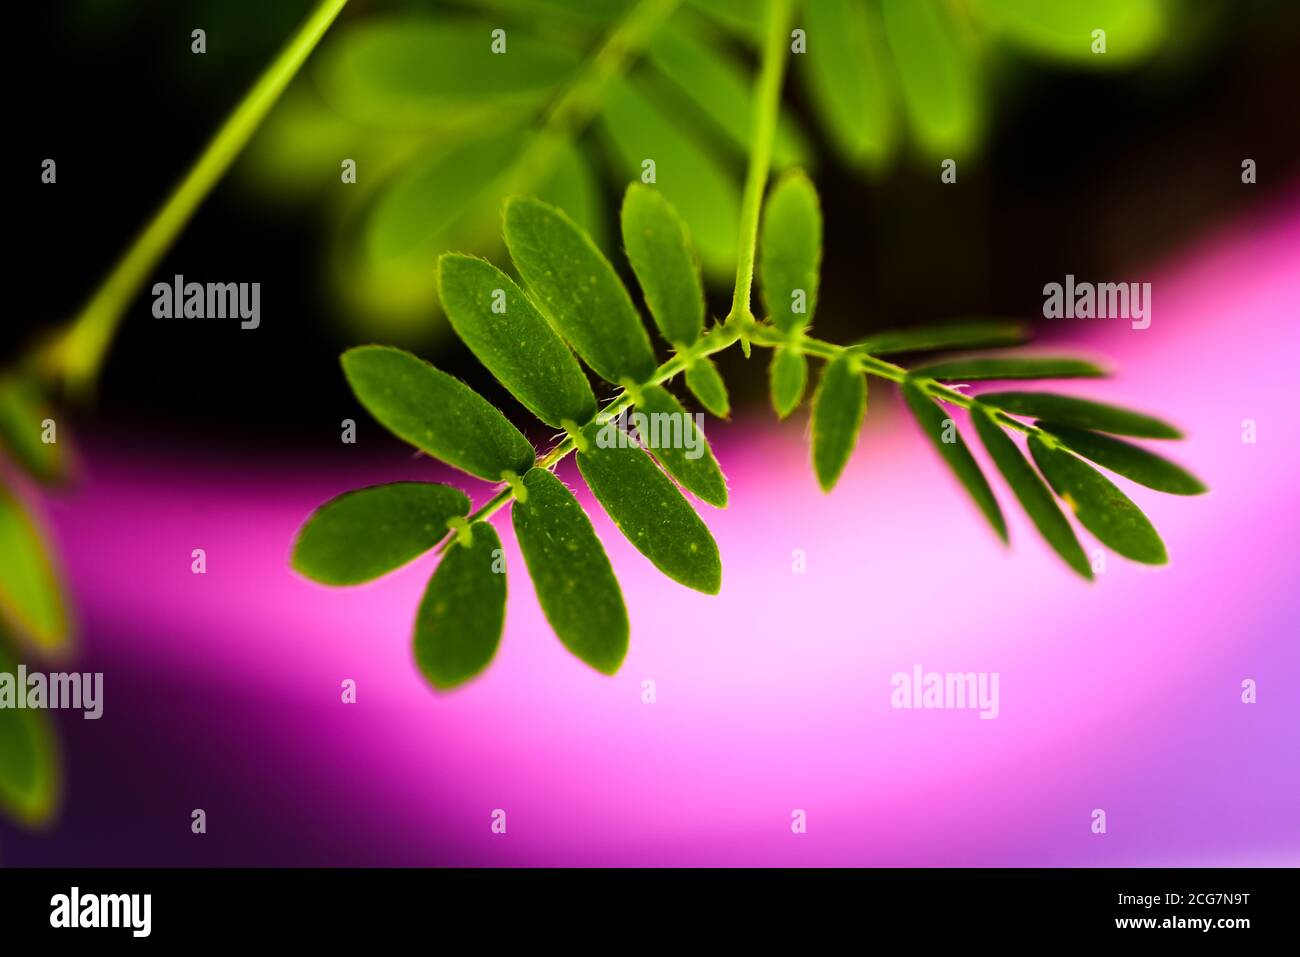 Proffesional Macro Photography of Mimosa pudica, also called sensitive plant, sleepy plant, action plant. Stock Photo